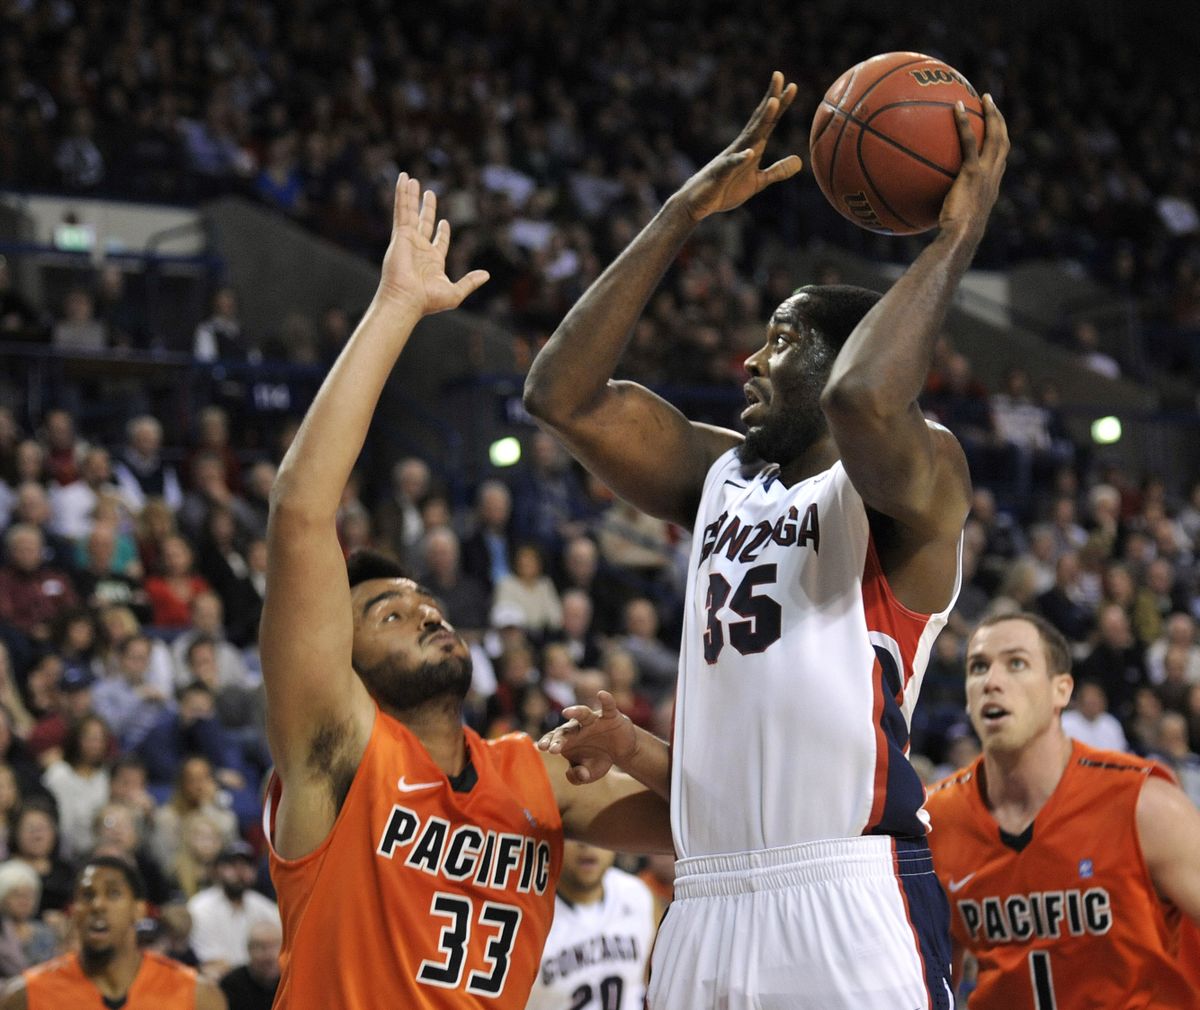 Gonzaga’s Sam Dower launches a shot over Pacific’s Tony Gill in the second half. (Dan Pelle)